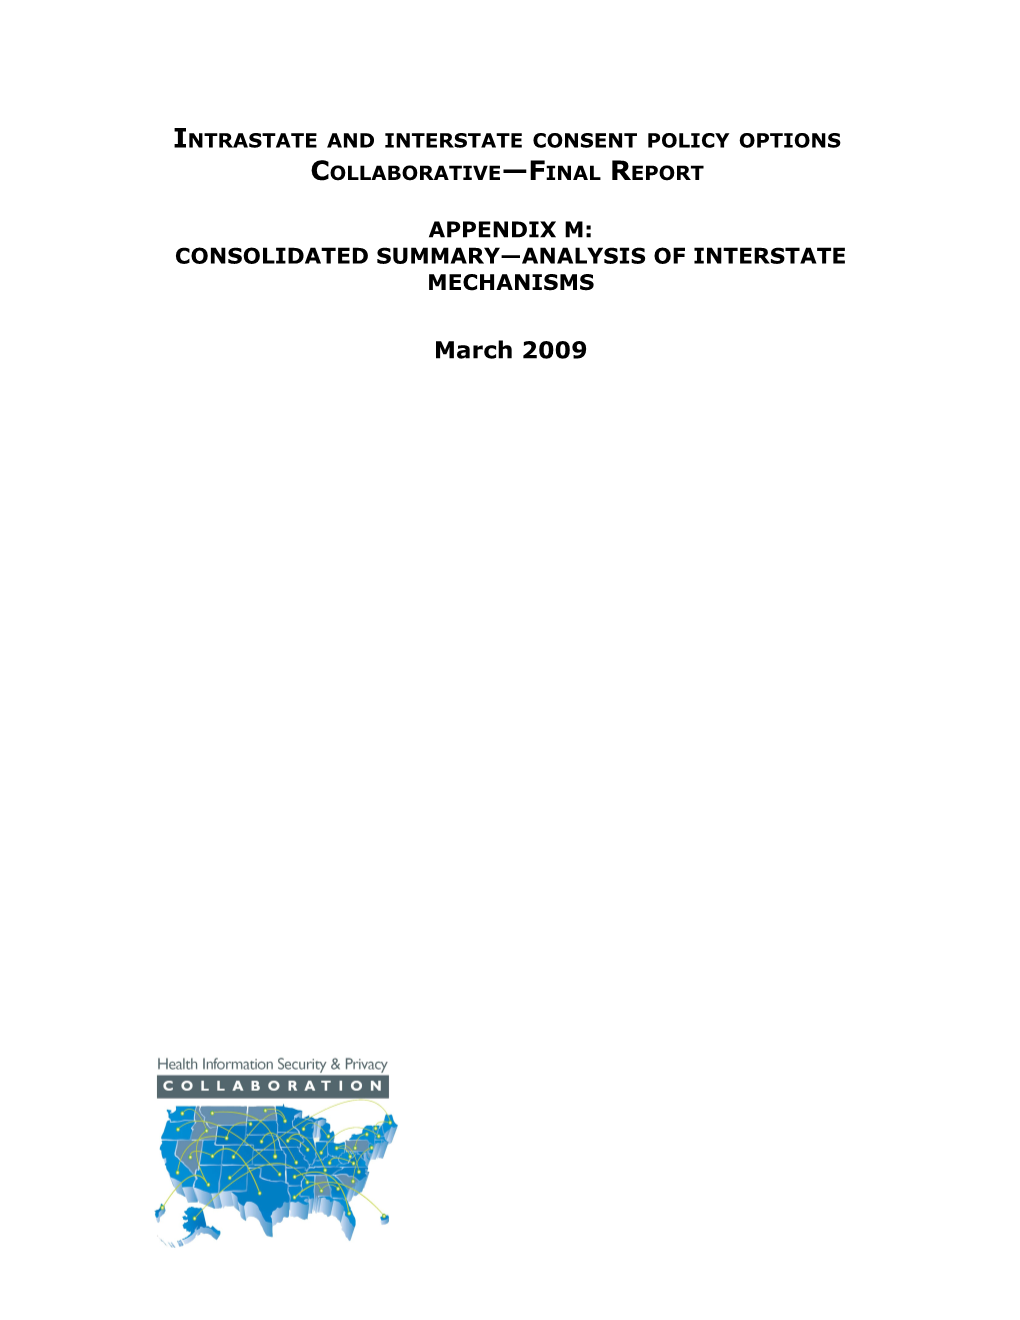 Intrastate and Interstate Consent Policy Options Collaborativeappendix M:CONSOLIDATED SUMMARY